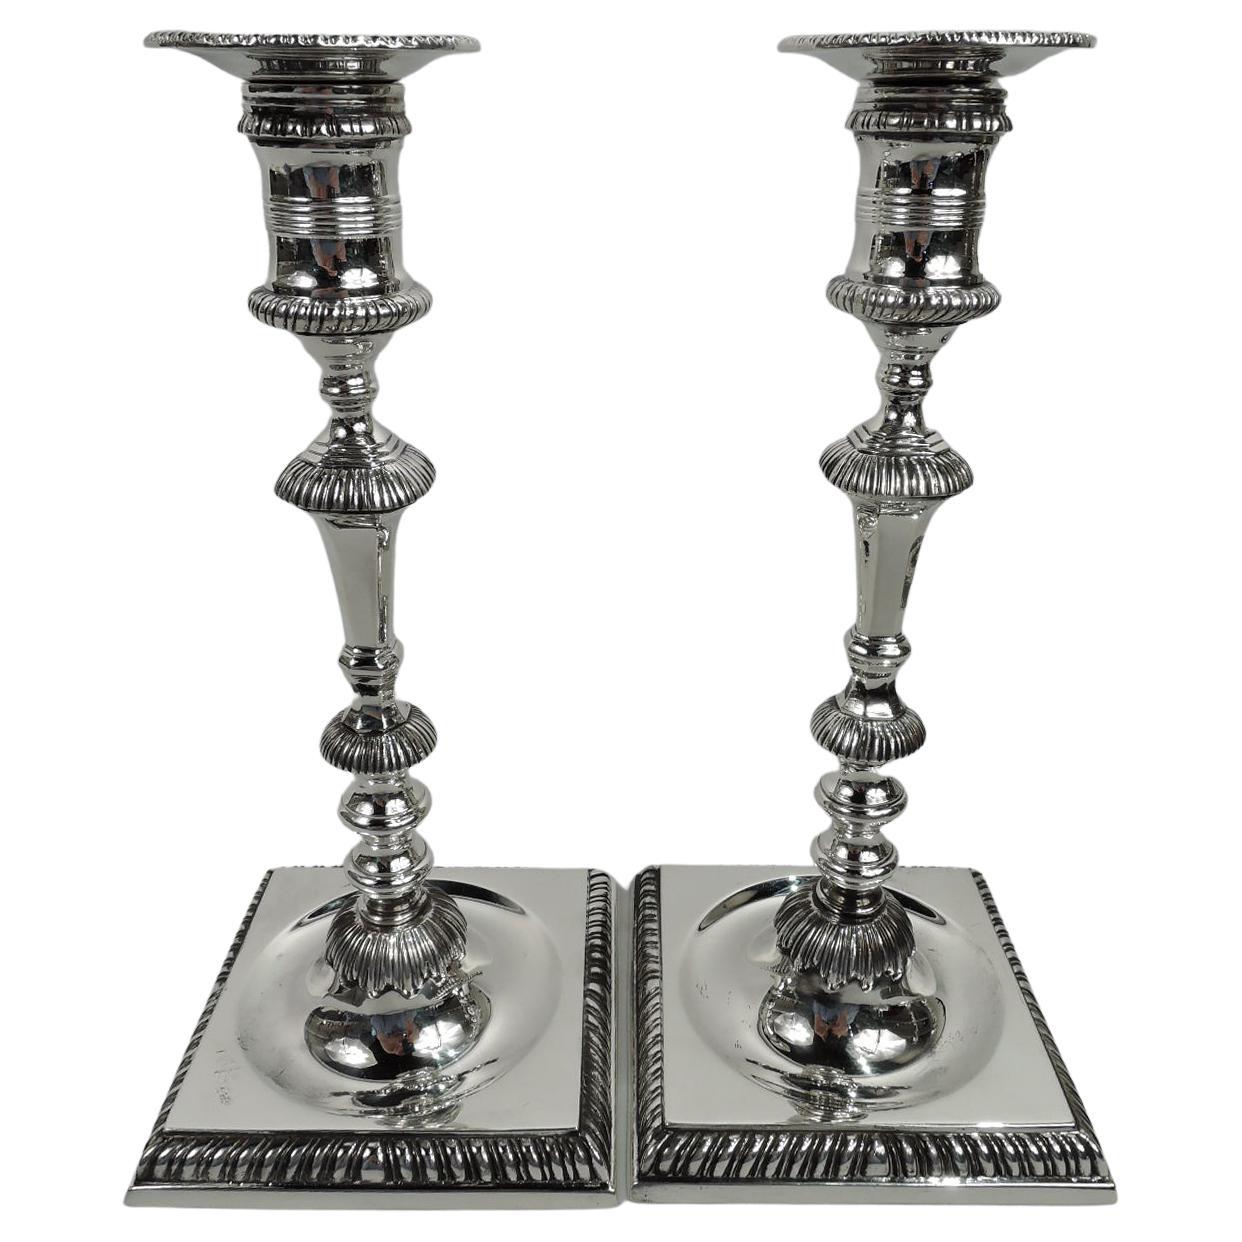 Pair of Georgian-Style Sterling Silver Candlesticks by Currier & Roby